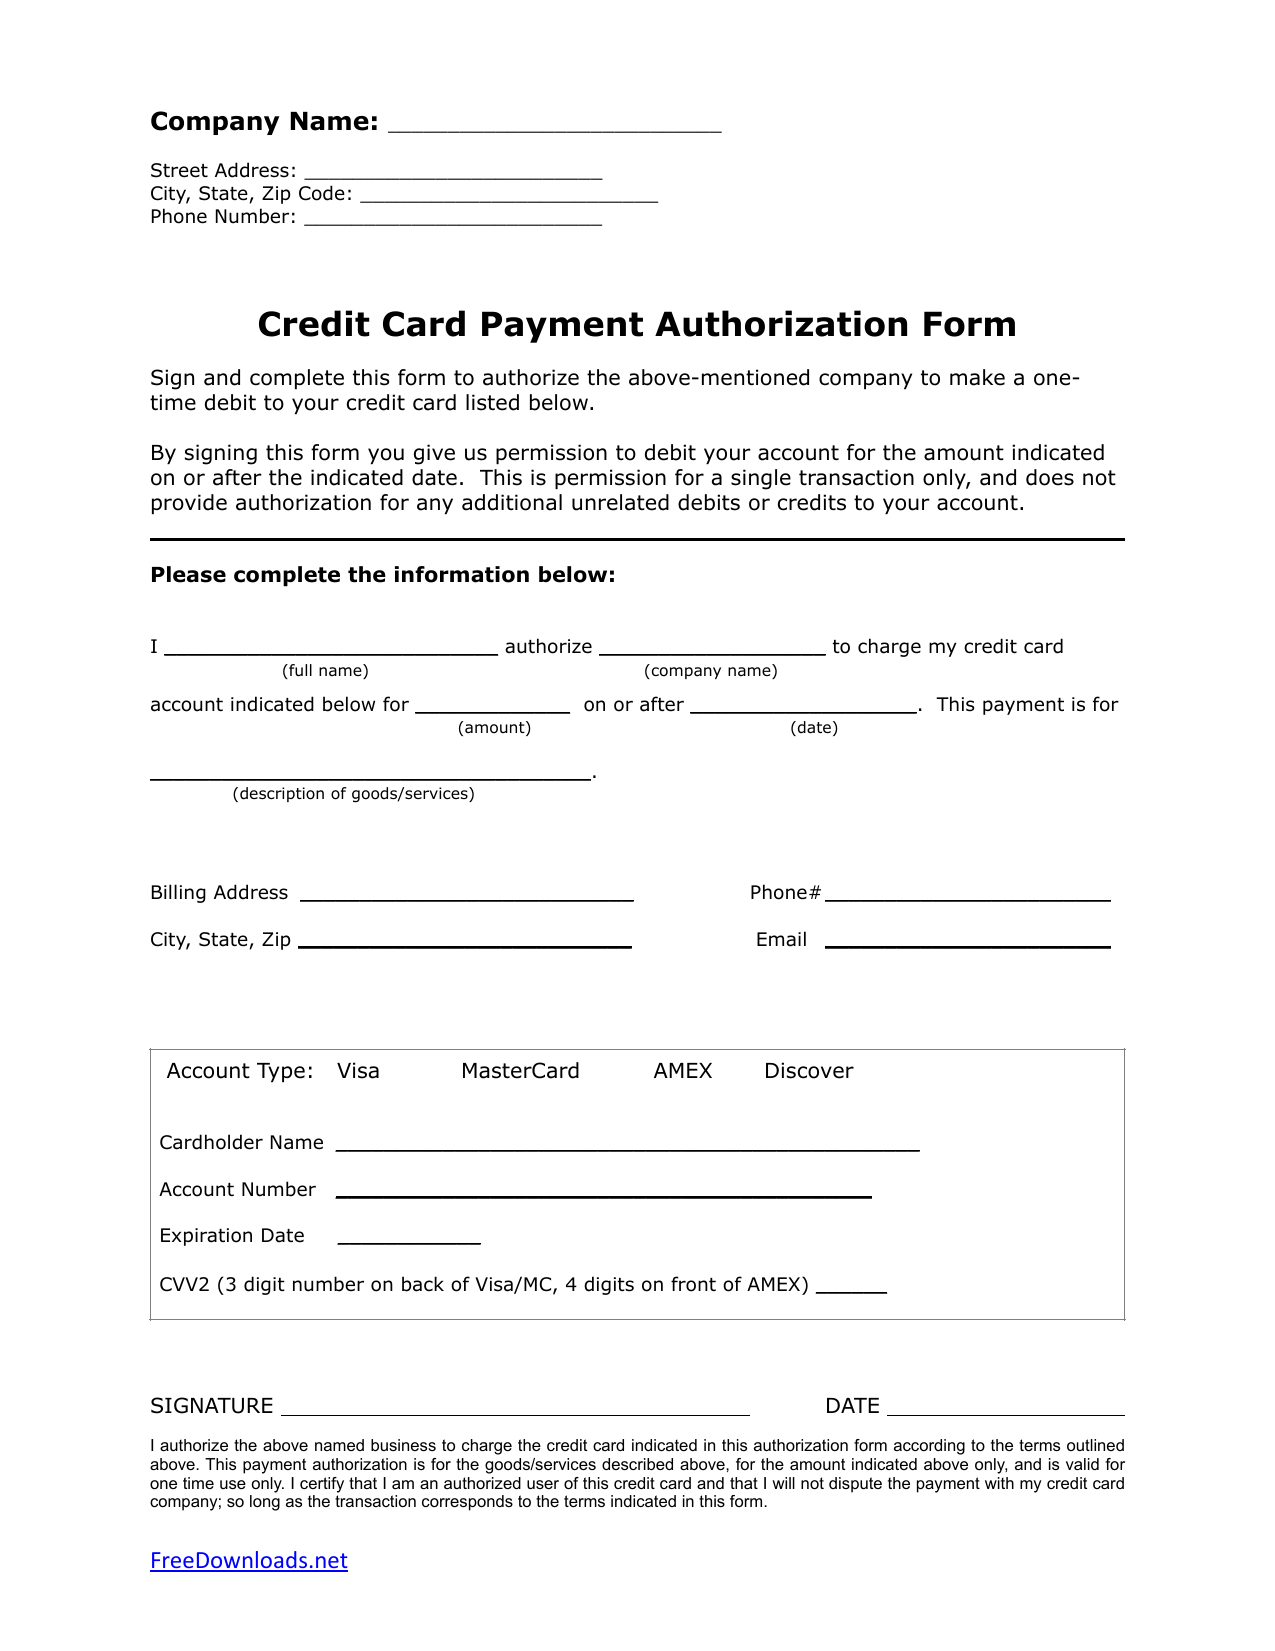 Download One (1) Time Credit Card Authorization Payment Form In Credit Card Billing Authorization Form Template